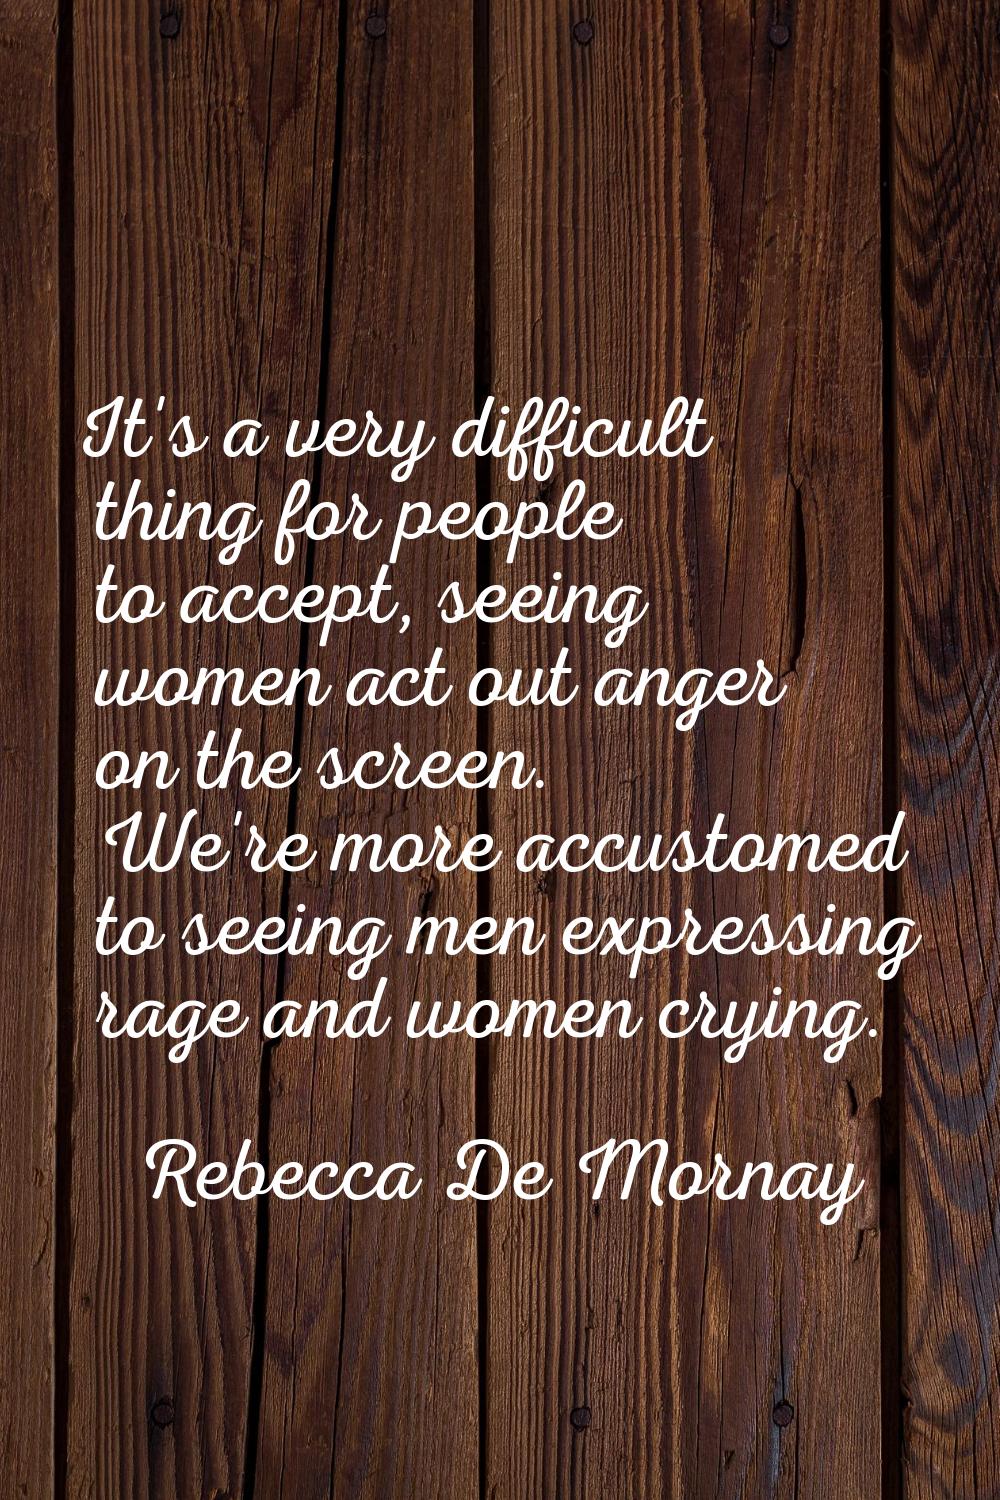 It's a very difficult thing for people to accept, seeing women act out anger on the screen. We're m